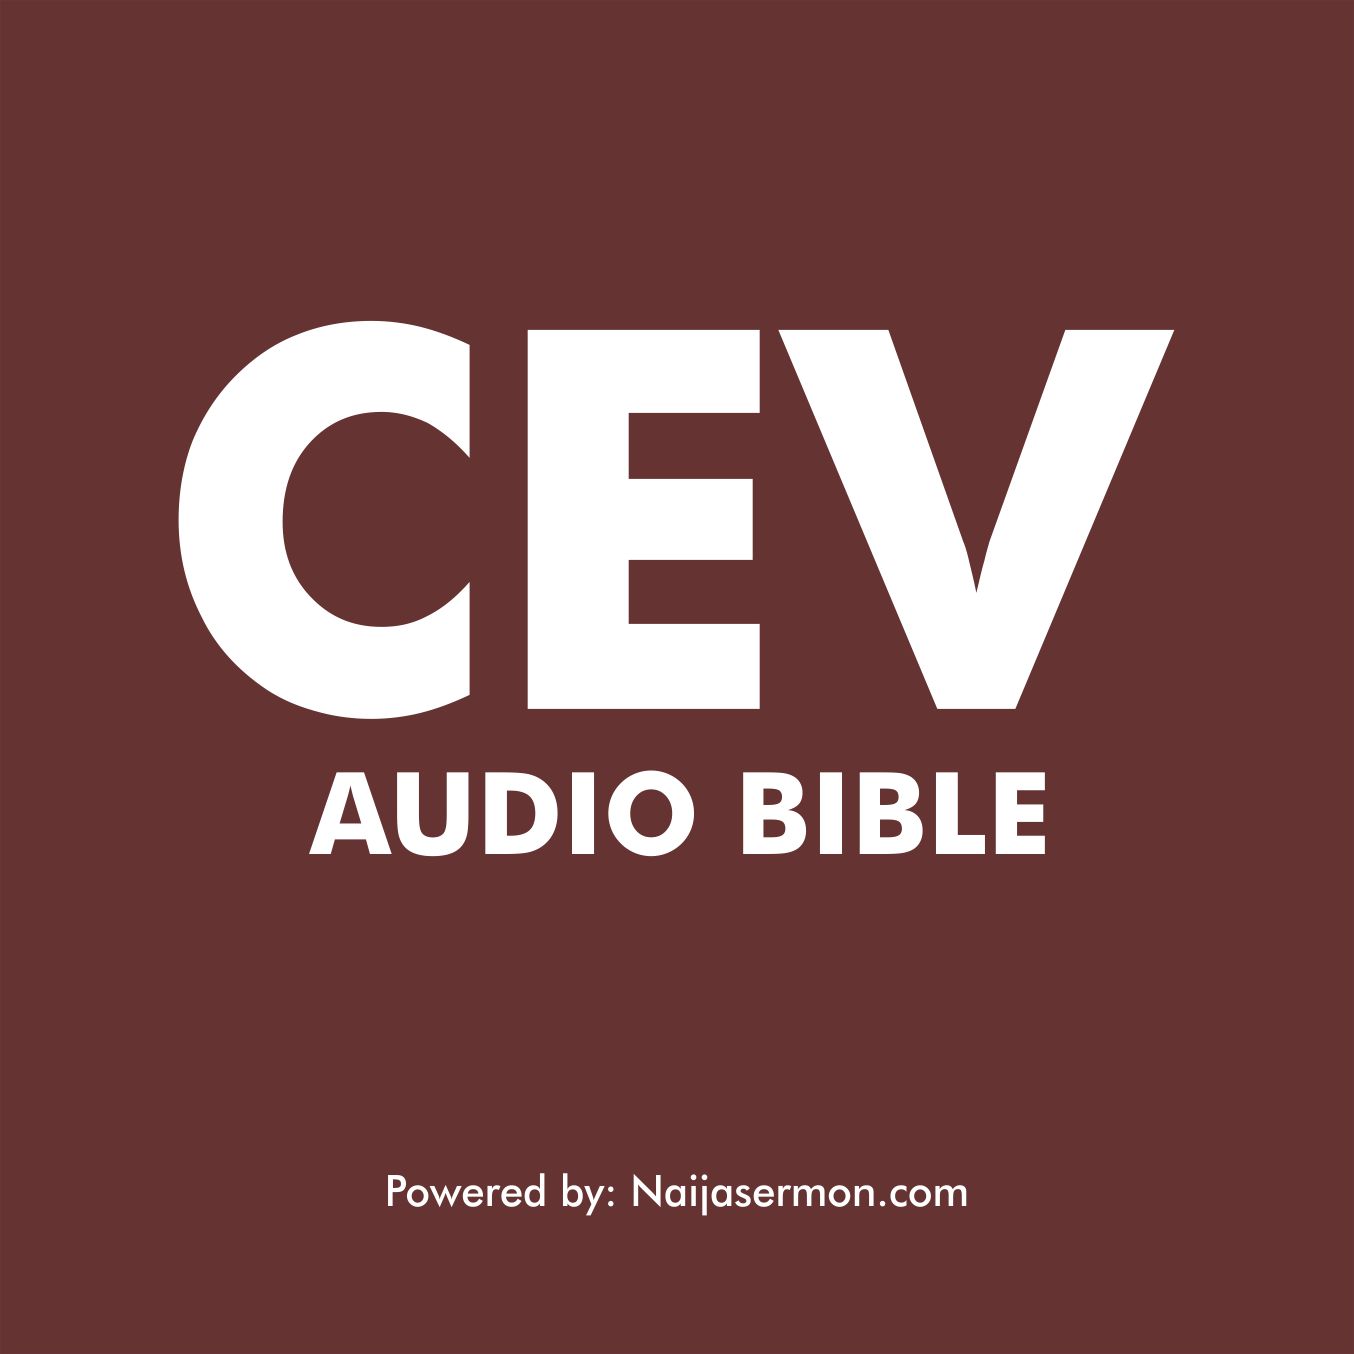 [Free] Download Contemporary English Version (CEV) Audio Bible MP3 - Dramatized 2